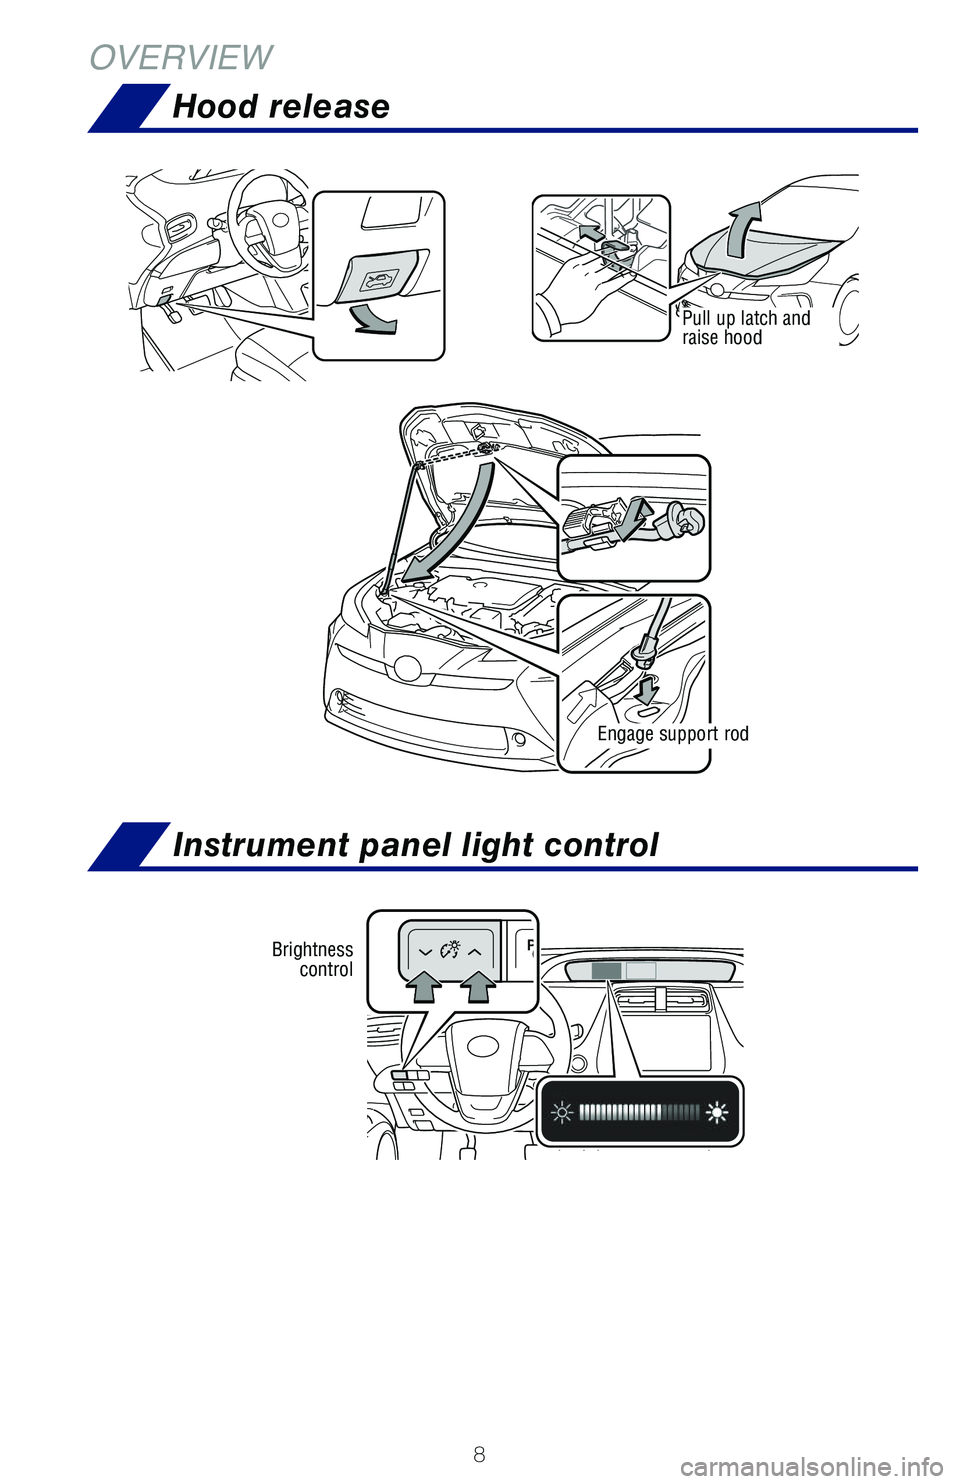 TOYOTA PRIUS 2019  Owners Manual (in English) 8
Instrument panel light control
Hood release
OVERVIEW
Pull up latch and raise hood
Engage support rod
Brightness control
116674_MY19_Prius_QRG_V3_ML_1126_TEXT_R1.indd   811/26/18   10:52 PM 